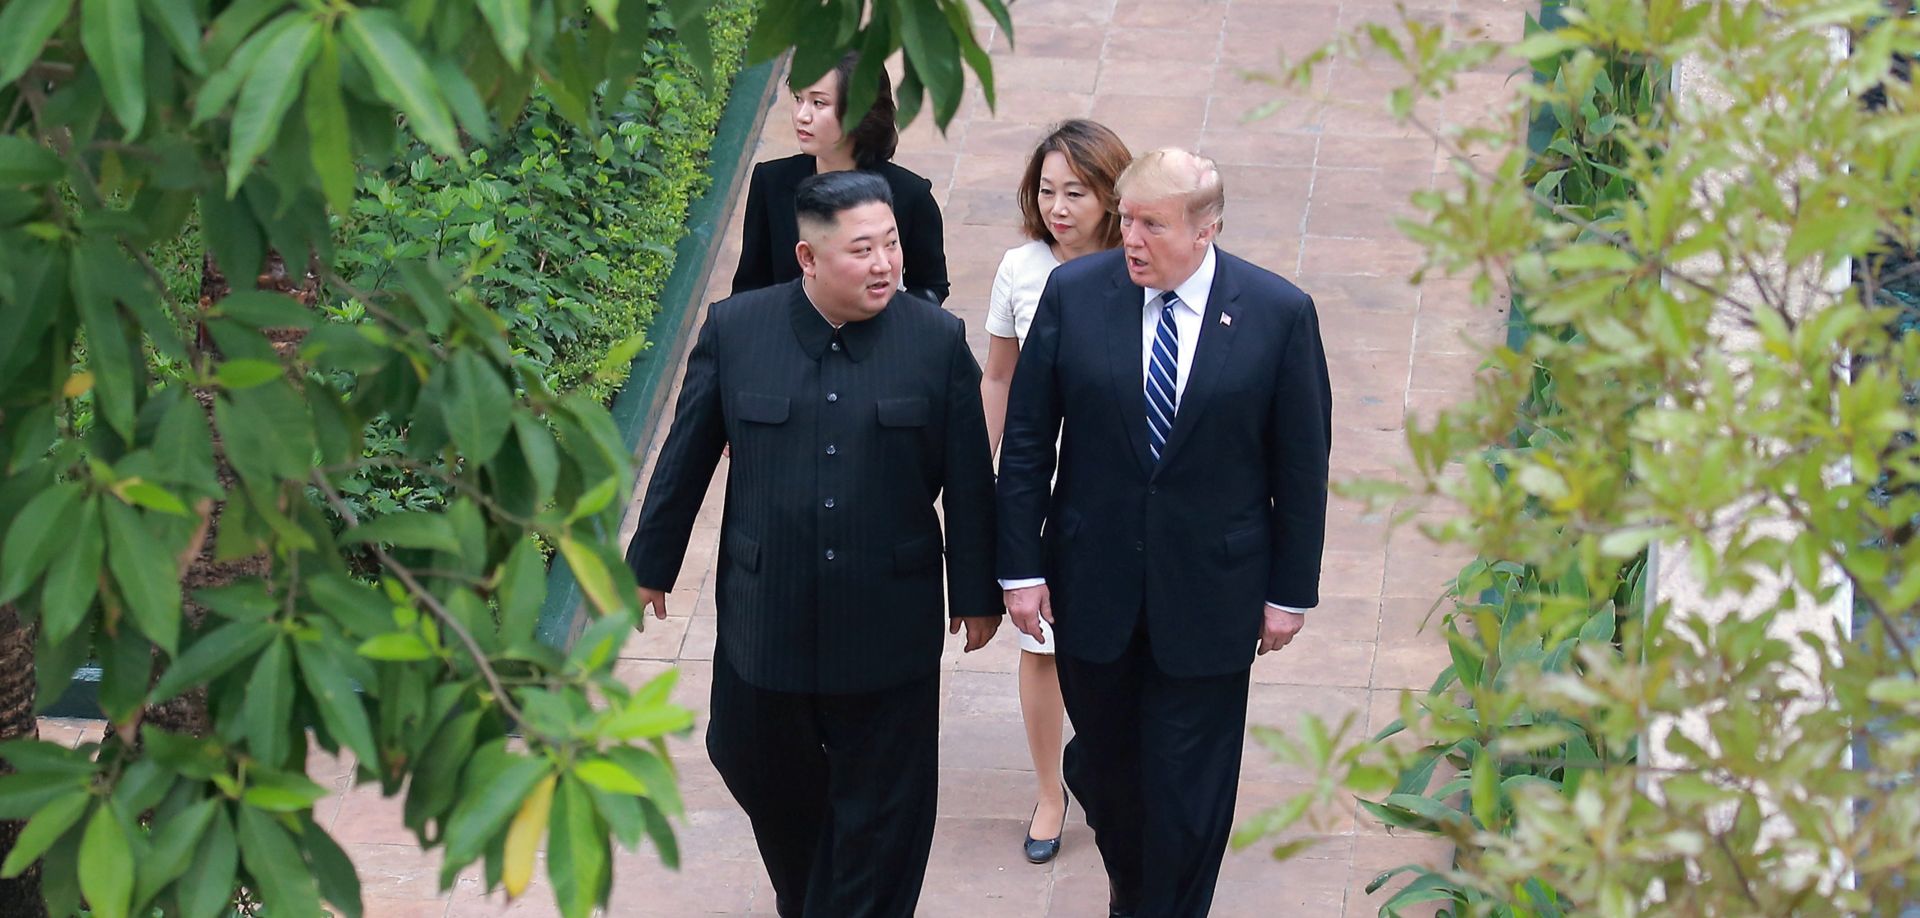 epa07405237 A photo released by the official North Korean Central News Agency (KCNA) shows North Korean leader Kim Jong Un (R) and US President Donald J. Trump (L) meeting in Hanoi, Vietnam, 28 February 2019.  The second meeting of the US President and the North Korean leader, running from 27 to 28 February 2019, focuses on furthering steps towards achieving peace and complete denuclearization of the Korean peninsula.  EPA/KCNA   EDITORIAL USE ONLY